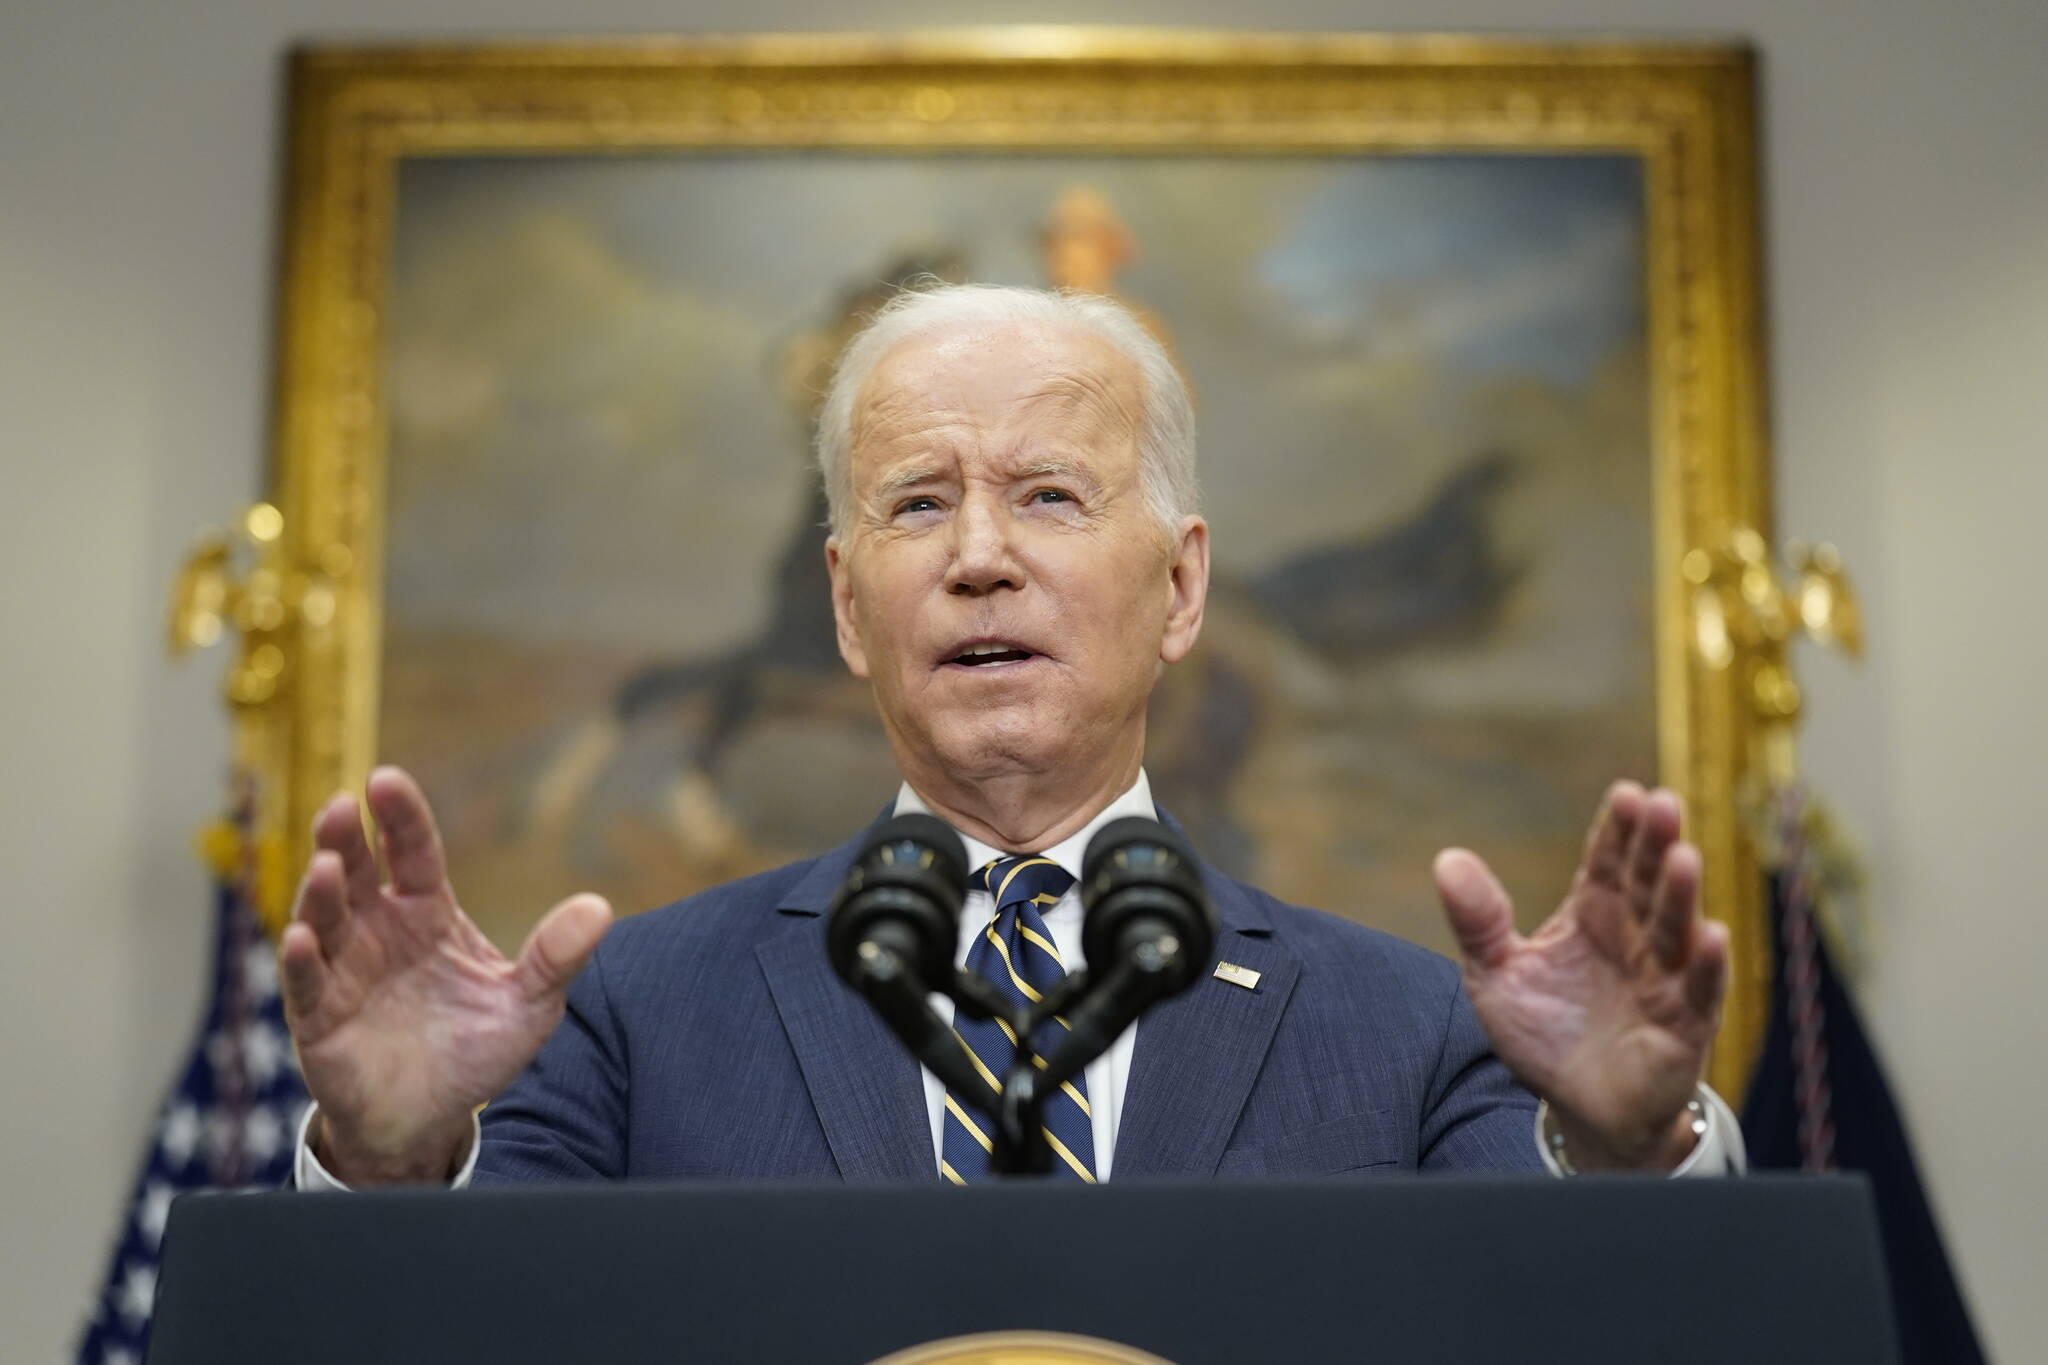 President Joe Biden announces that along with the European Union and the Group of Seven countries, the U.S. will move to revoke “most favored nation” trade status for Russia over its invasion of Ukraine, Friday, March 11, 2022, in the Roosevelt Room at the White House in Washington. (AP Photo/Andrew Harnik)